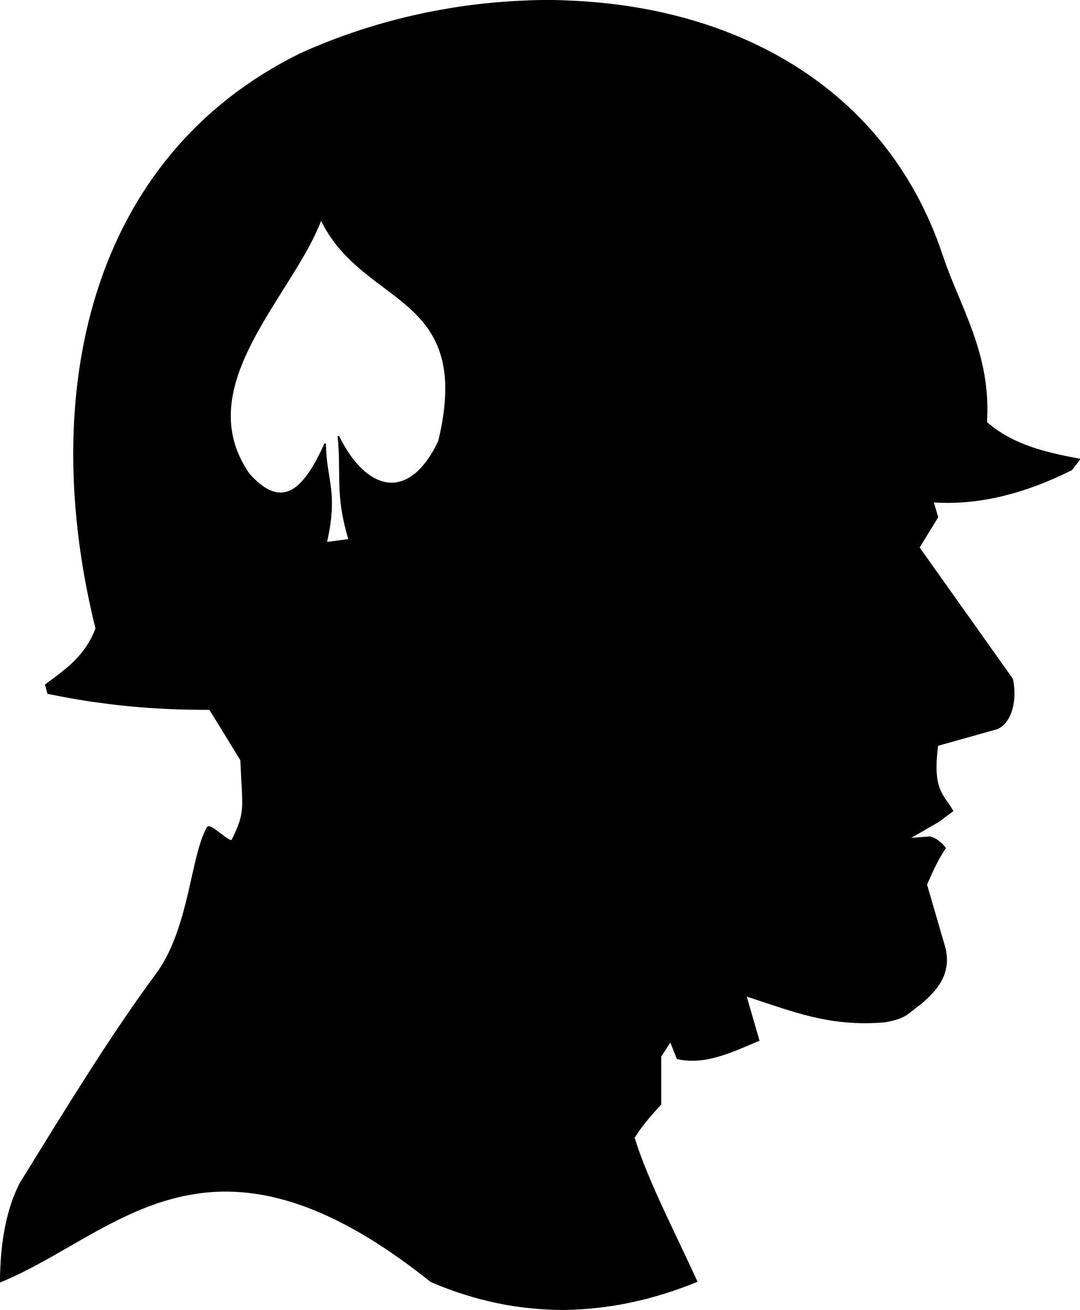 U.S. World War Two Soldier Silhouette png transparent